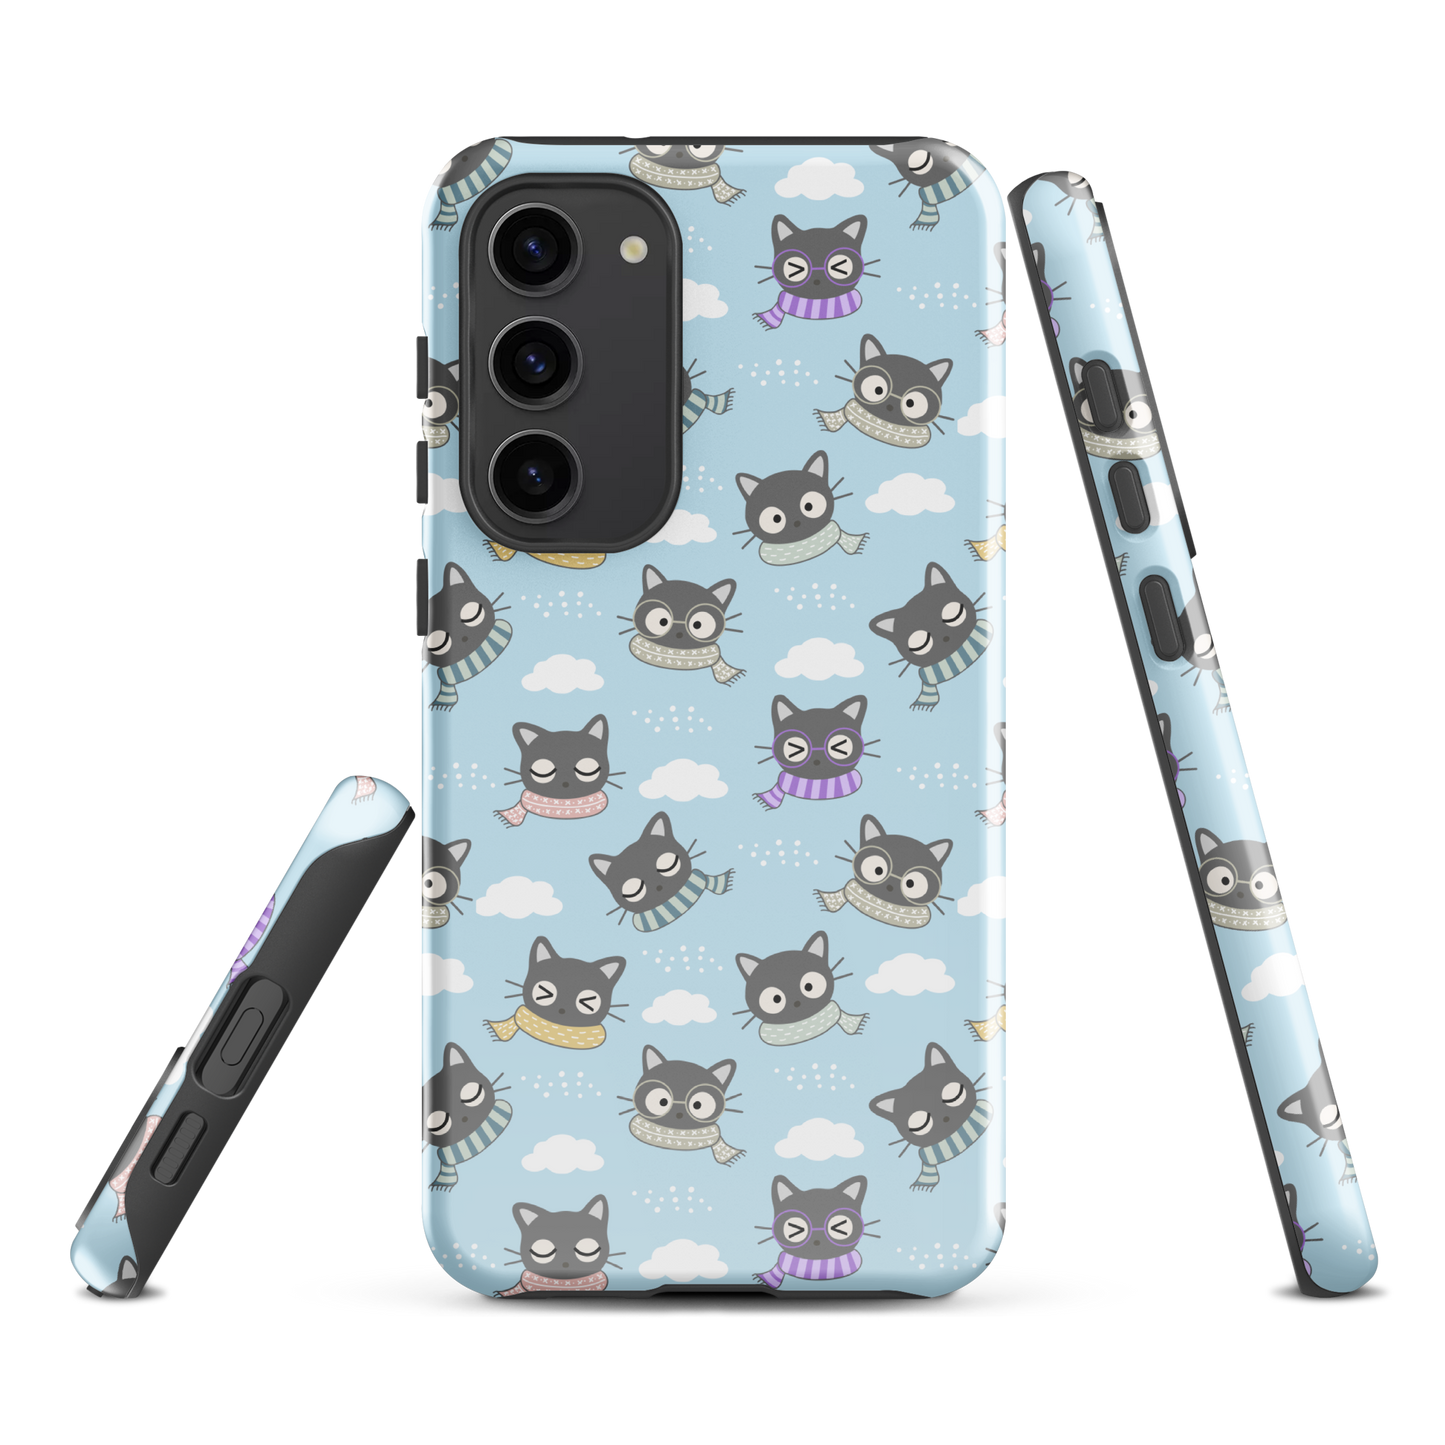 Tough case for Samsung Galaxy Variations | Gray Cat with Scarf in the Cloud